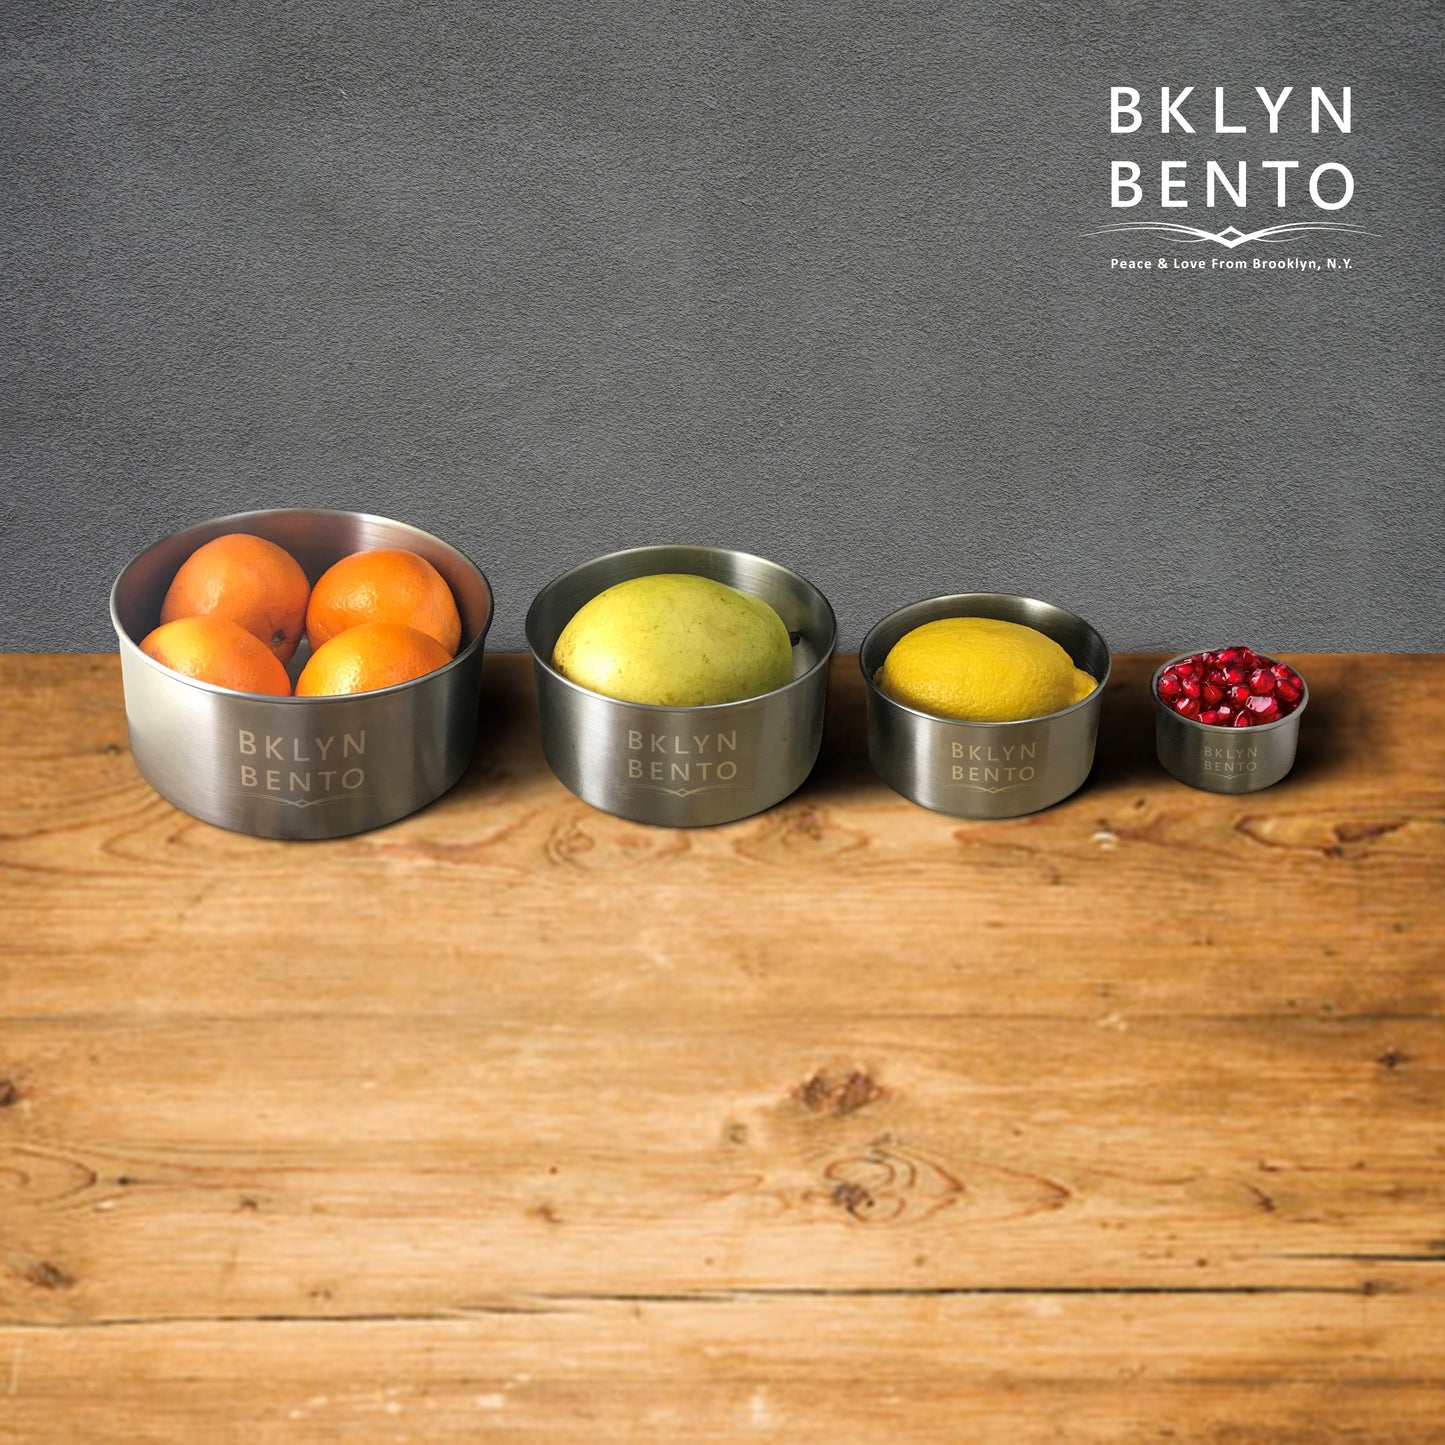 Bklyn Bento Stainless Steel 4 Piece Set Lunch Box, Food Containers with Leakproof Lids